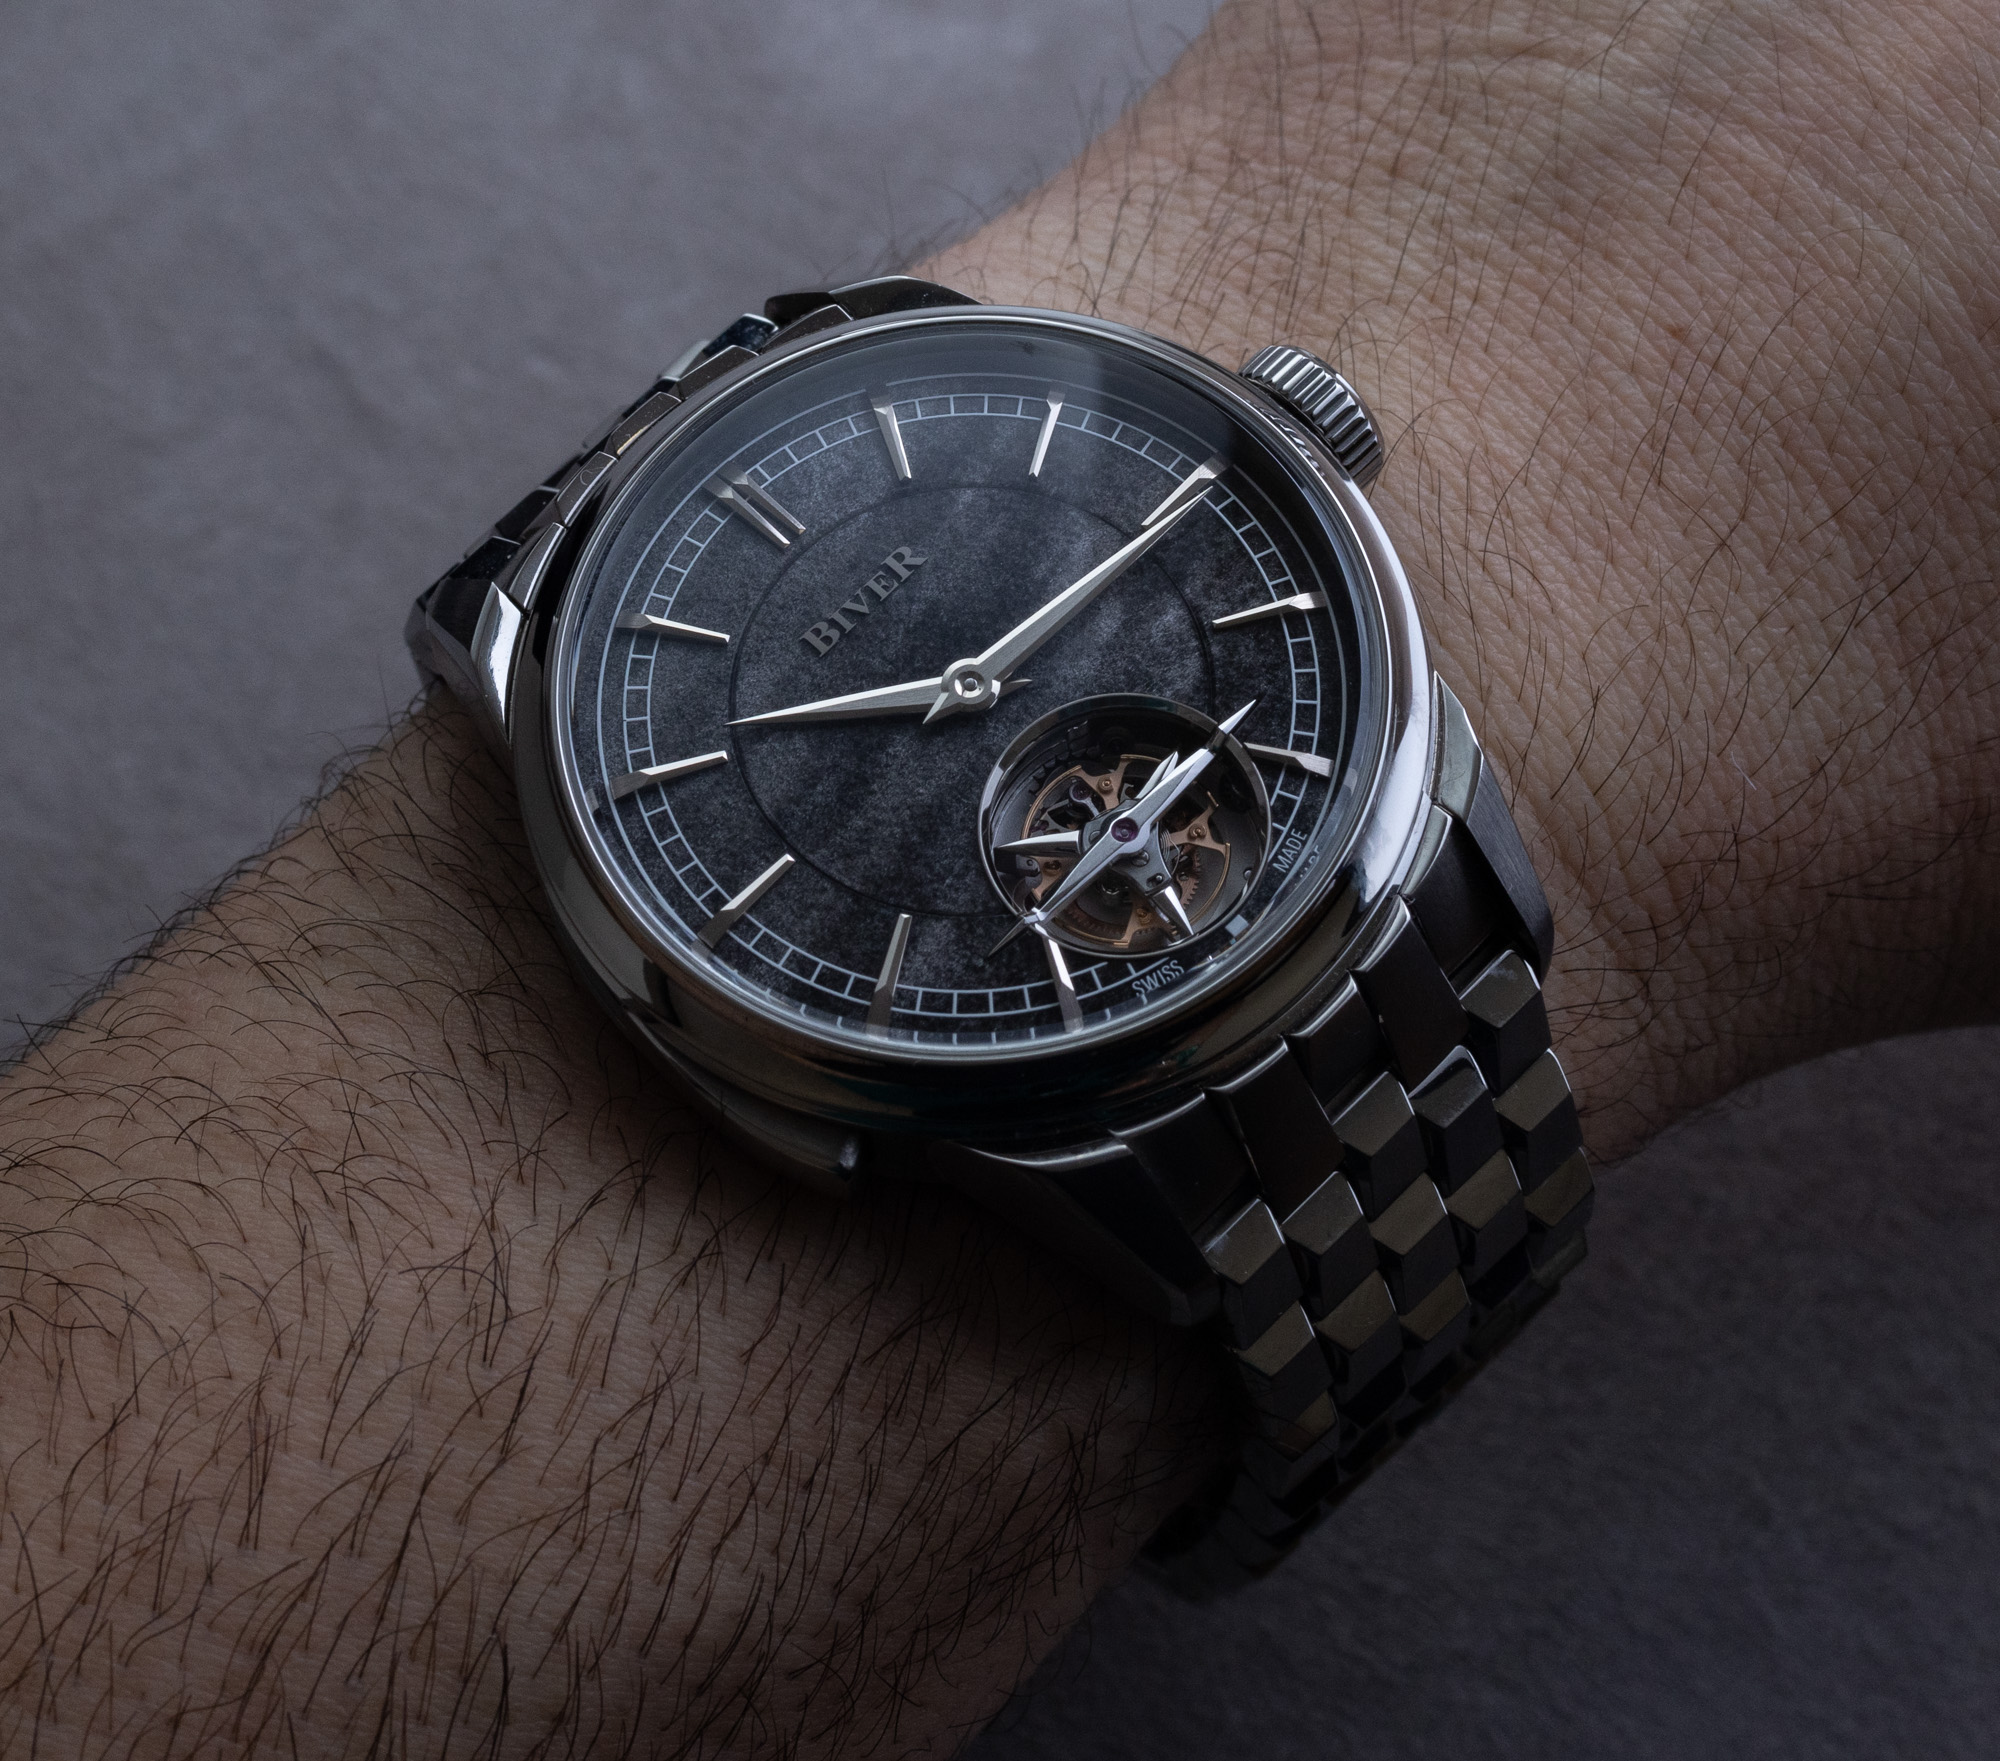 Jean Claude Biver & Son Unveil Their First Watch: The Carillon